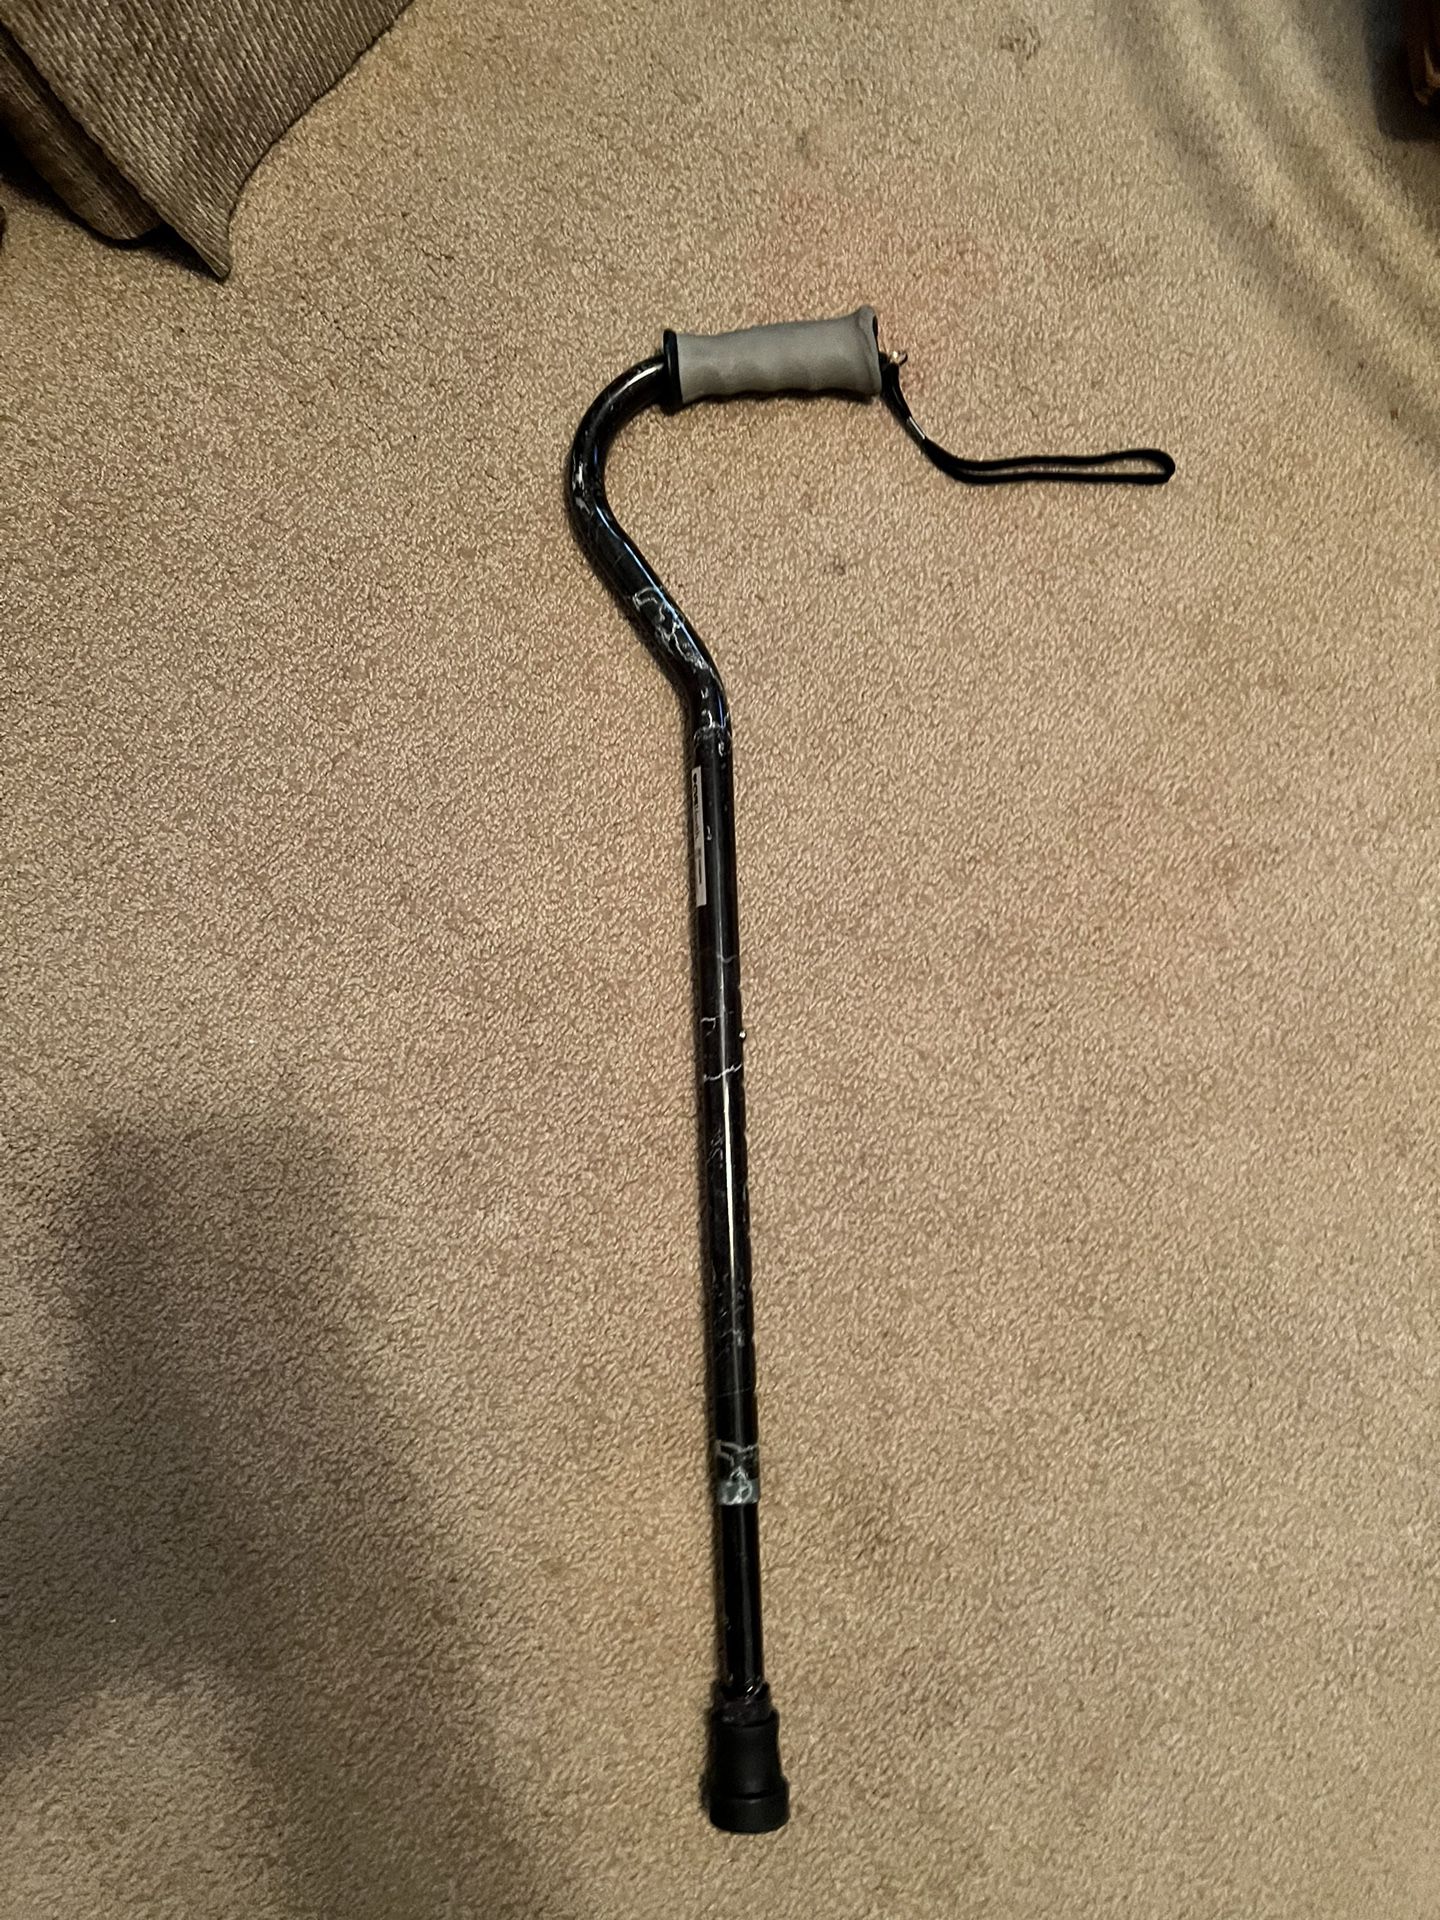 Almost Brand New Walking Cane From Cvs